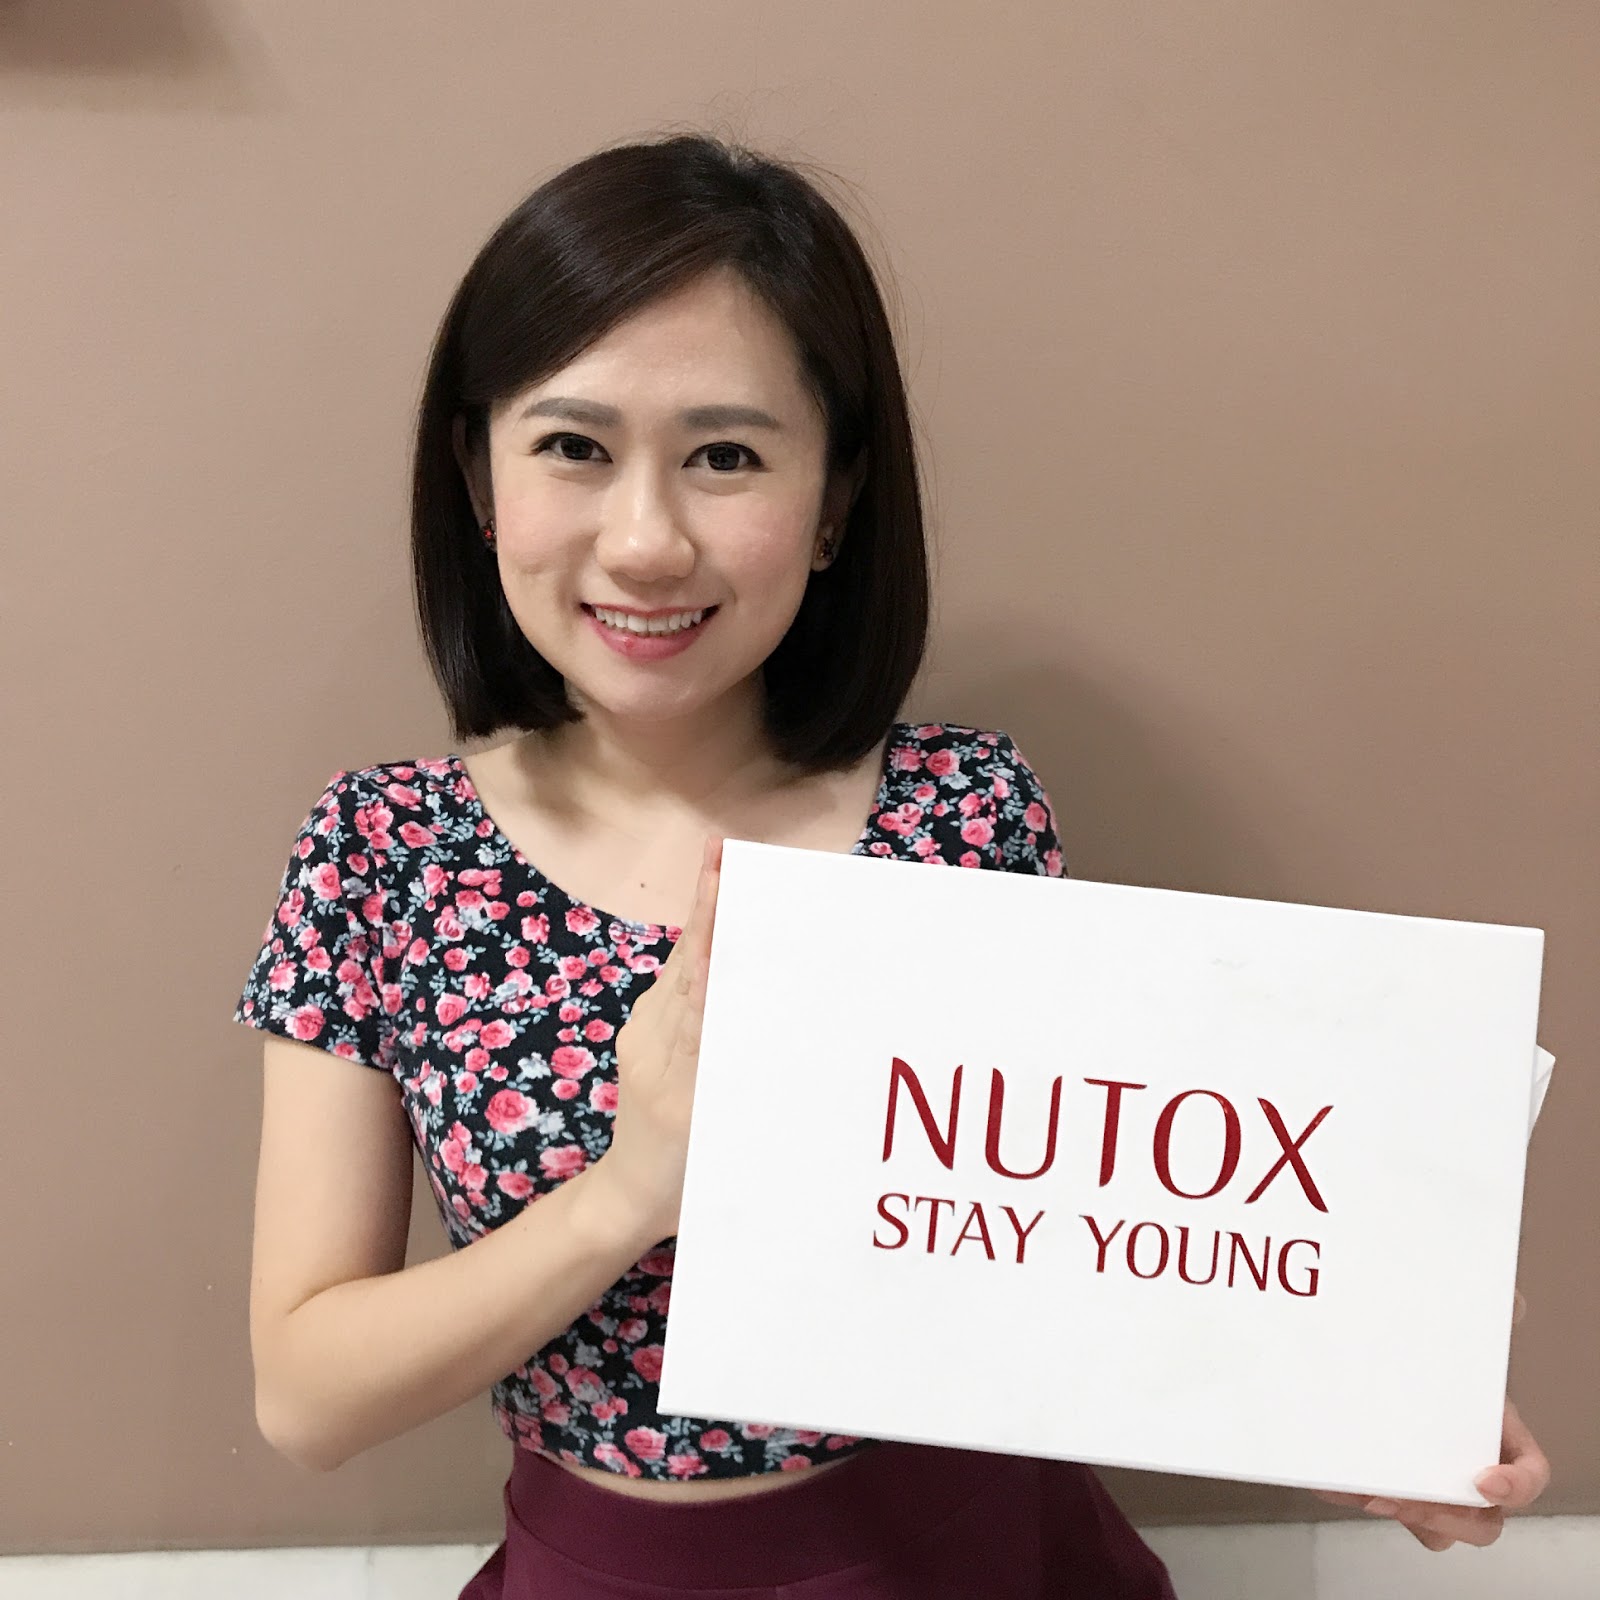 To Look Younger in 7 Days | Nutox Stay Young Review 